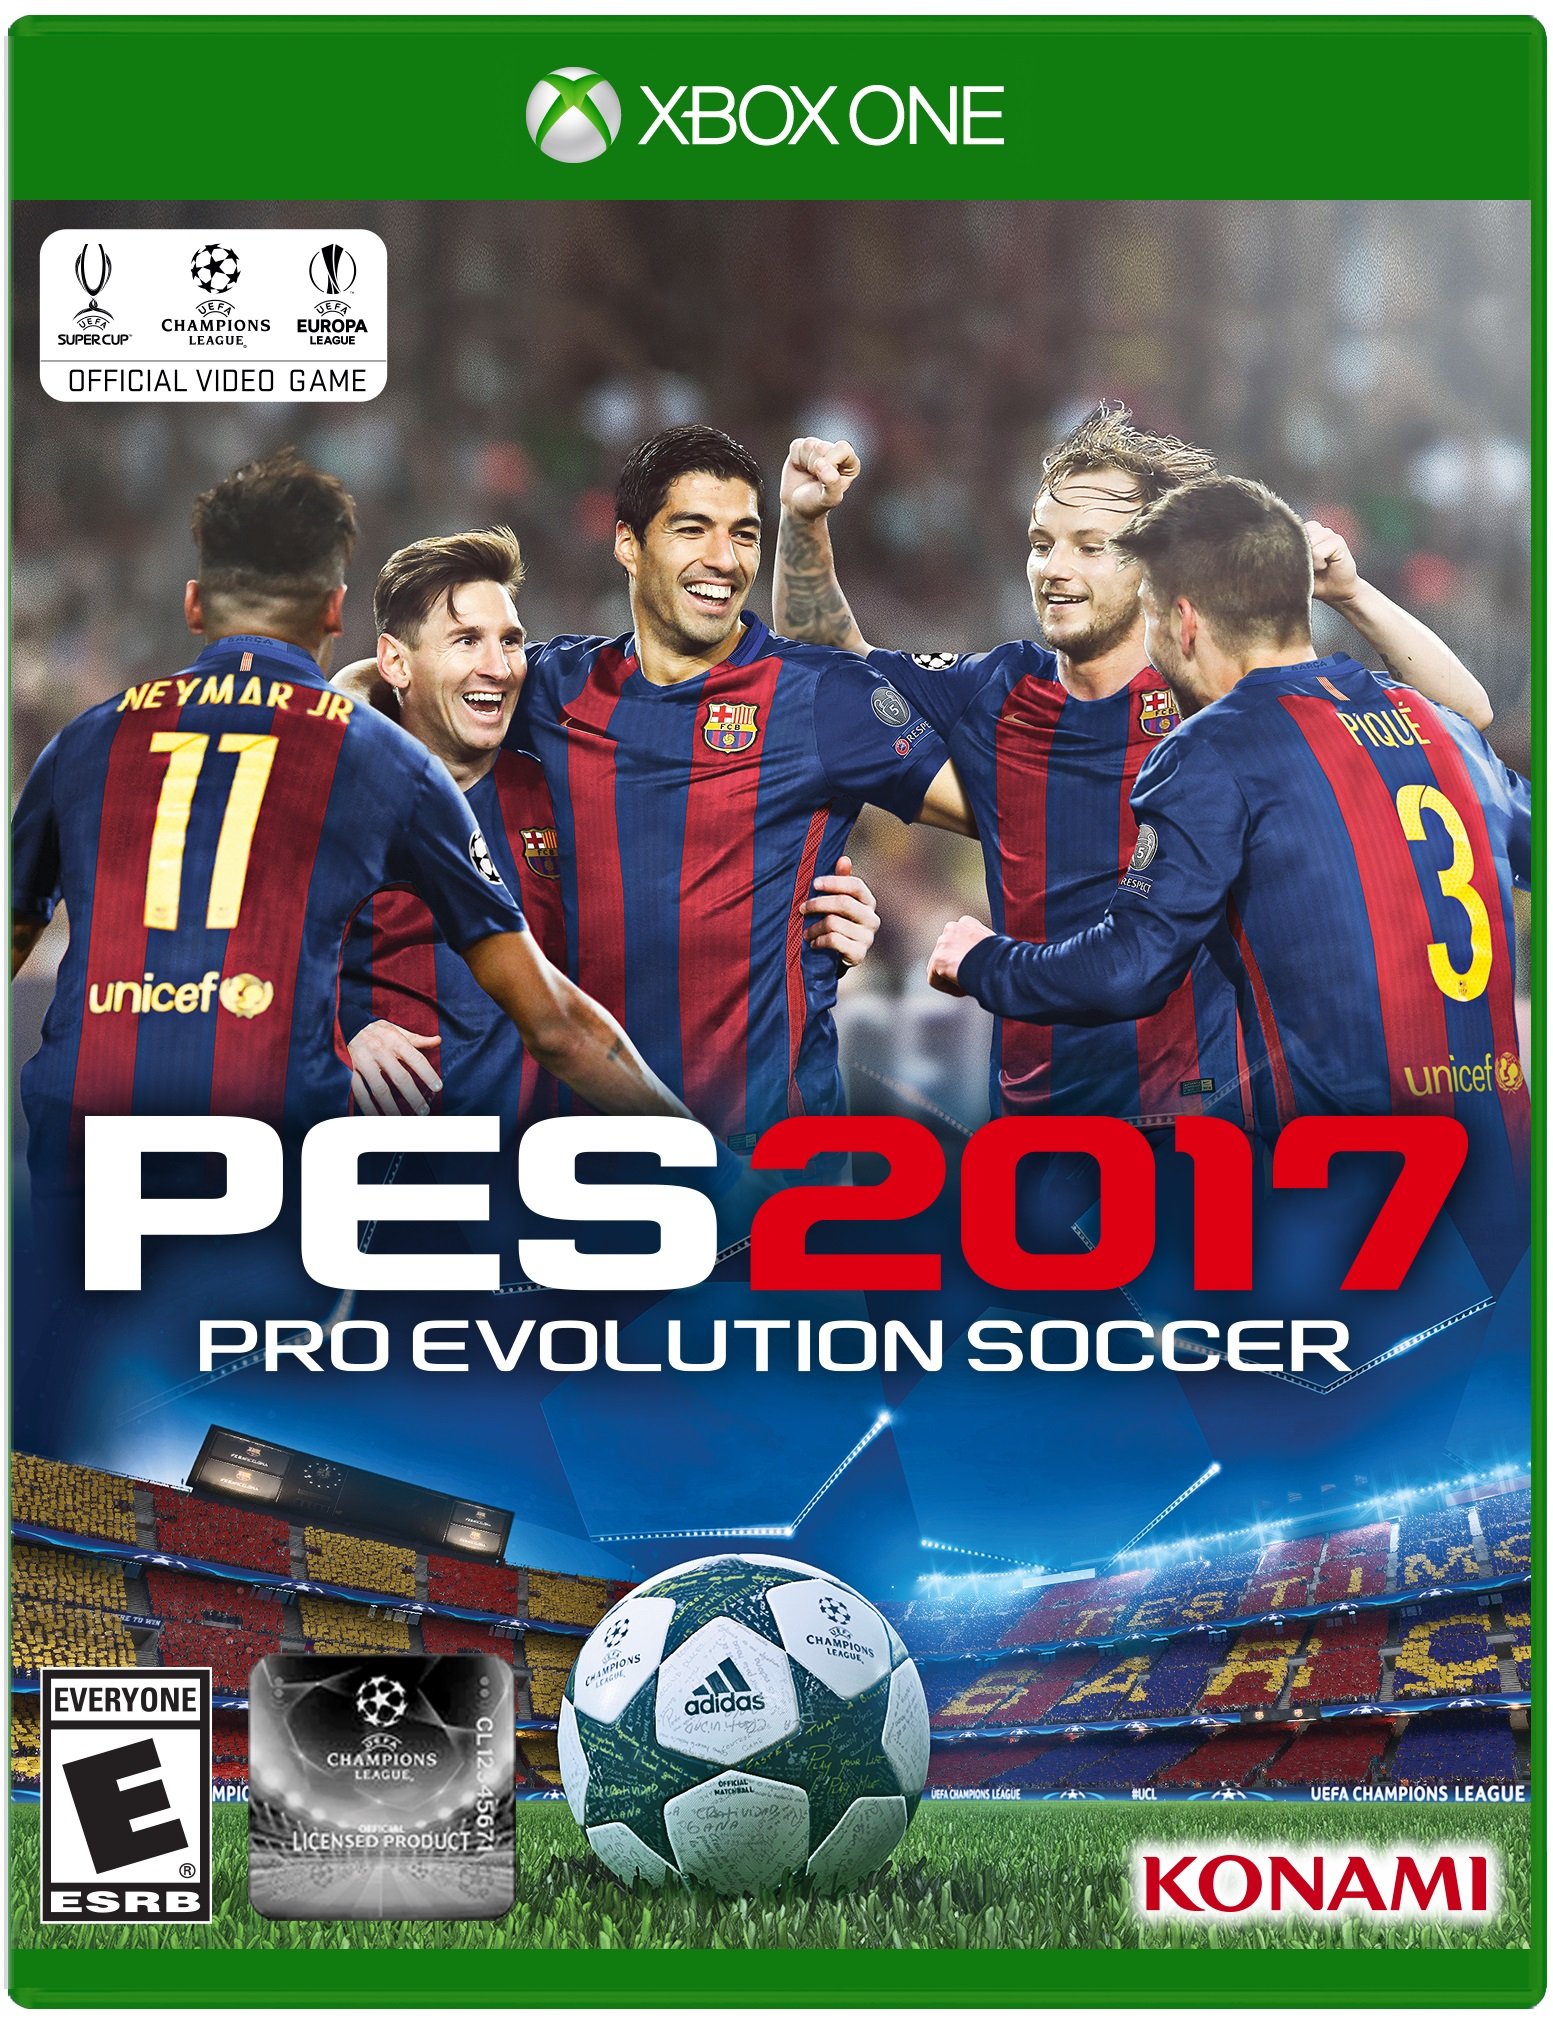 pro evolution soccer 2017 has stopped working